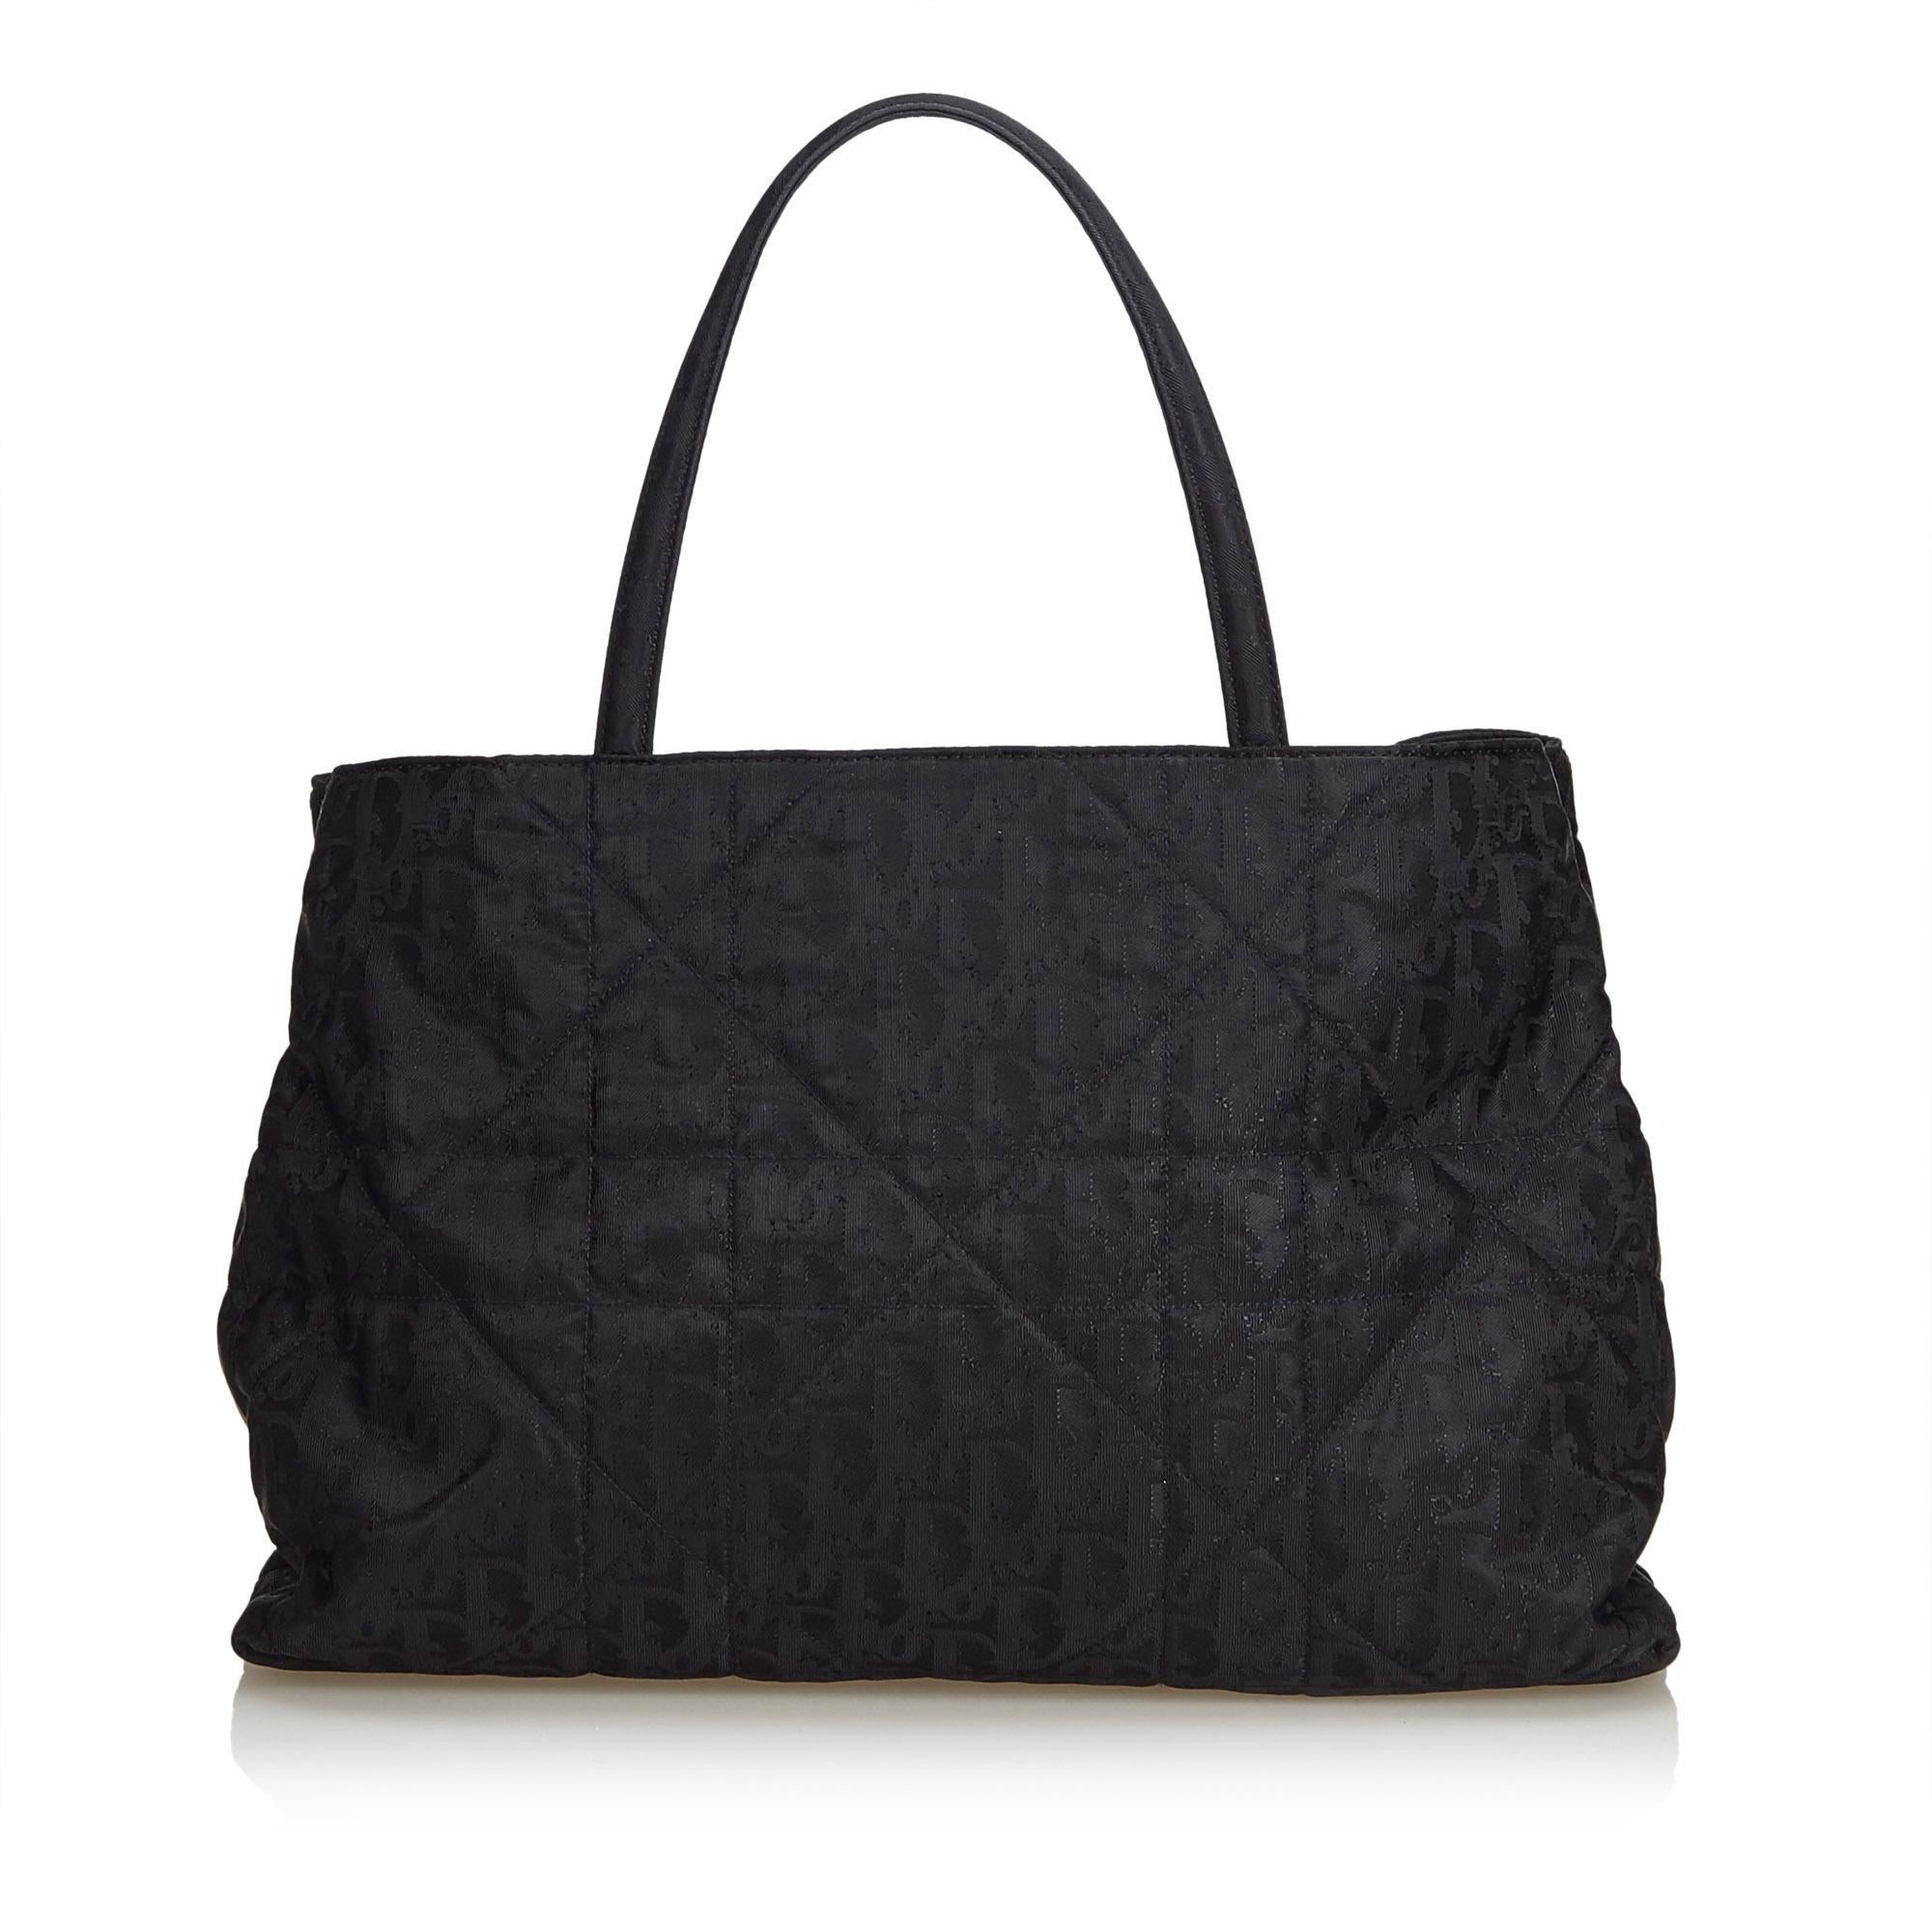 Dior Black Quilted Nylon Tote Bag In Good Condition For Sale In Orlando, FL